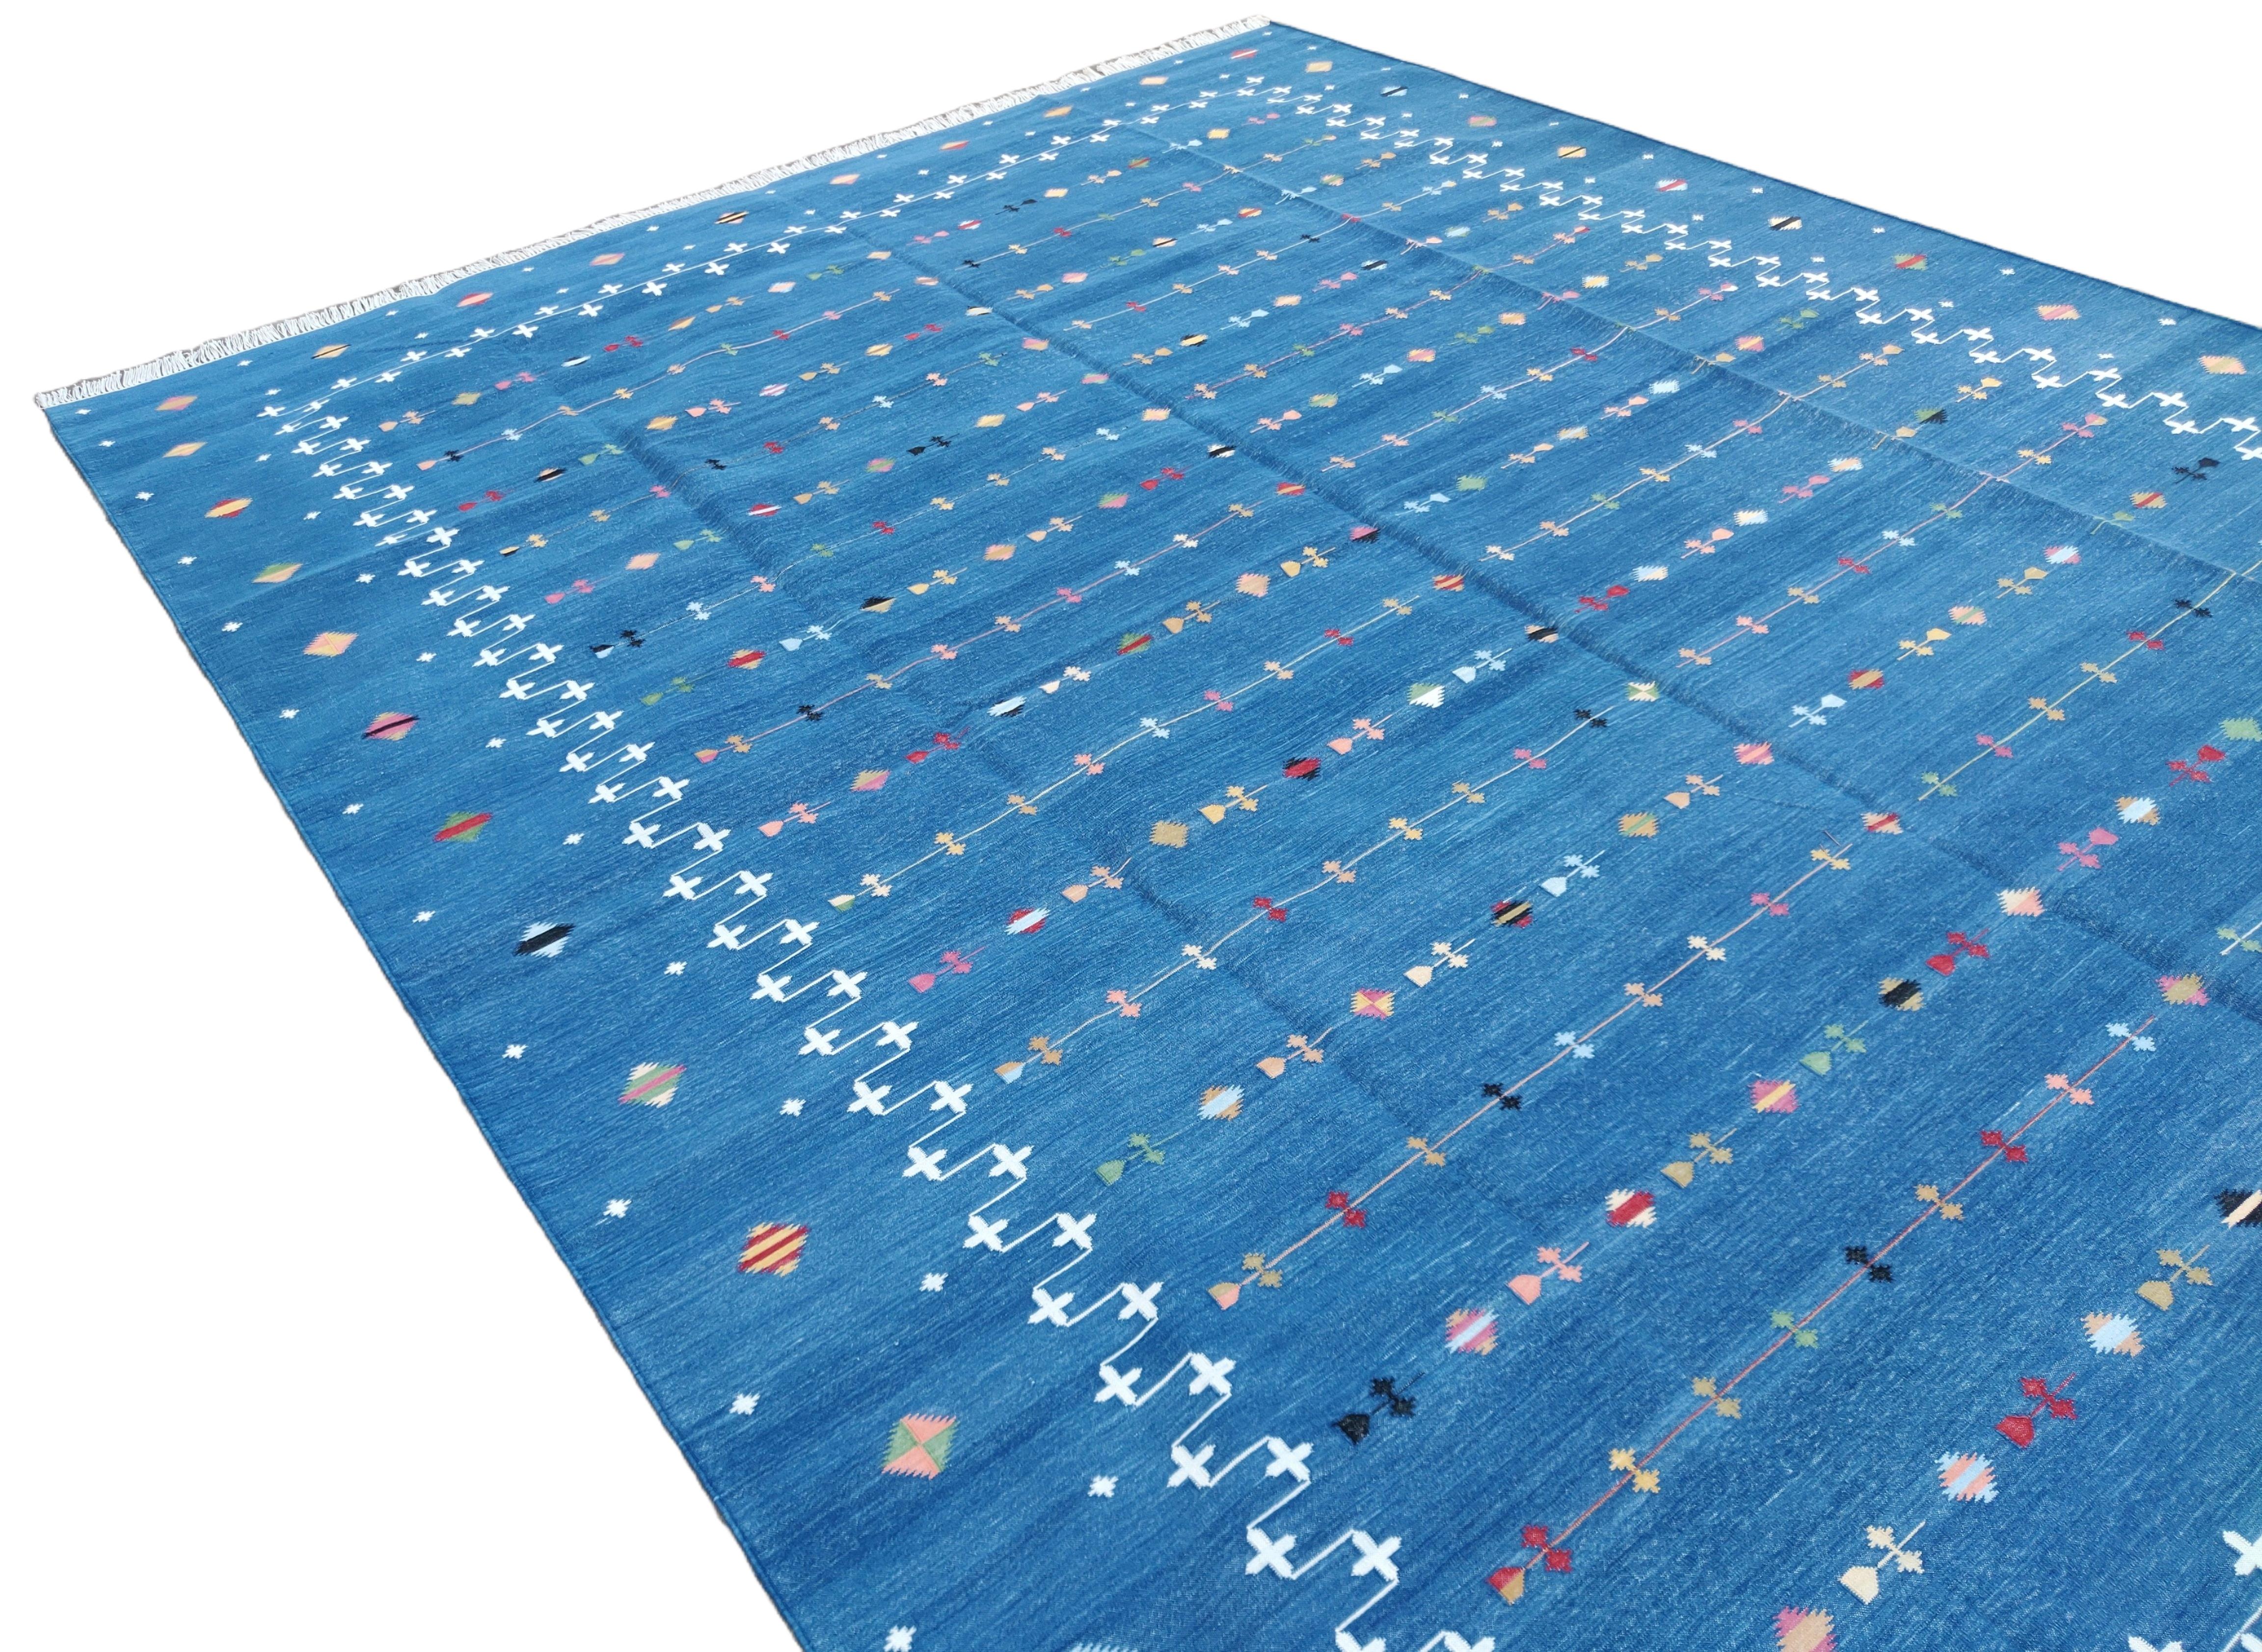 Handmade Cotton Area Flat Weave Rug, 9x12 Blue And White Shooting Star Dhurrie In New Condition For Sale In Jaipur, IN